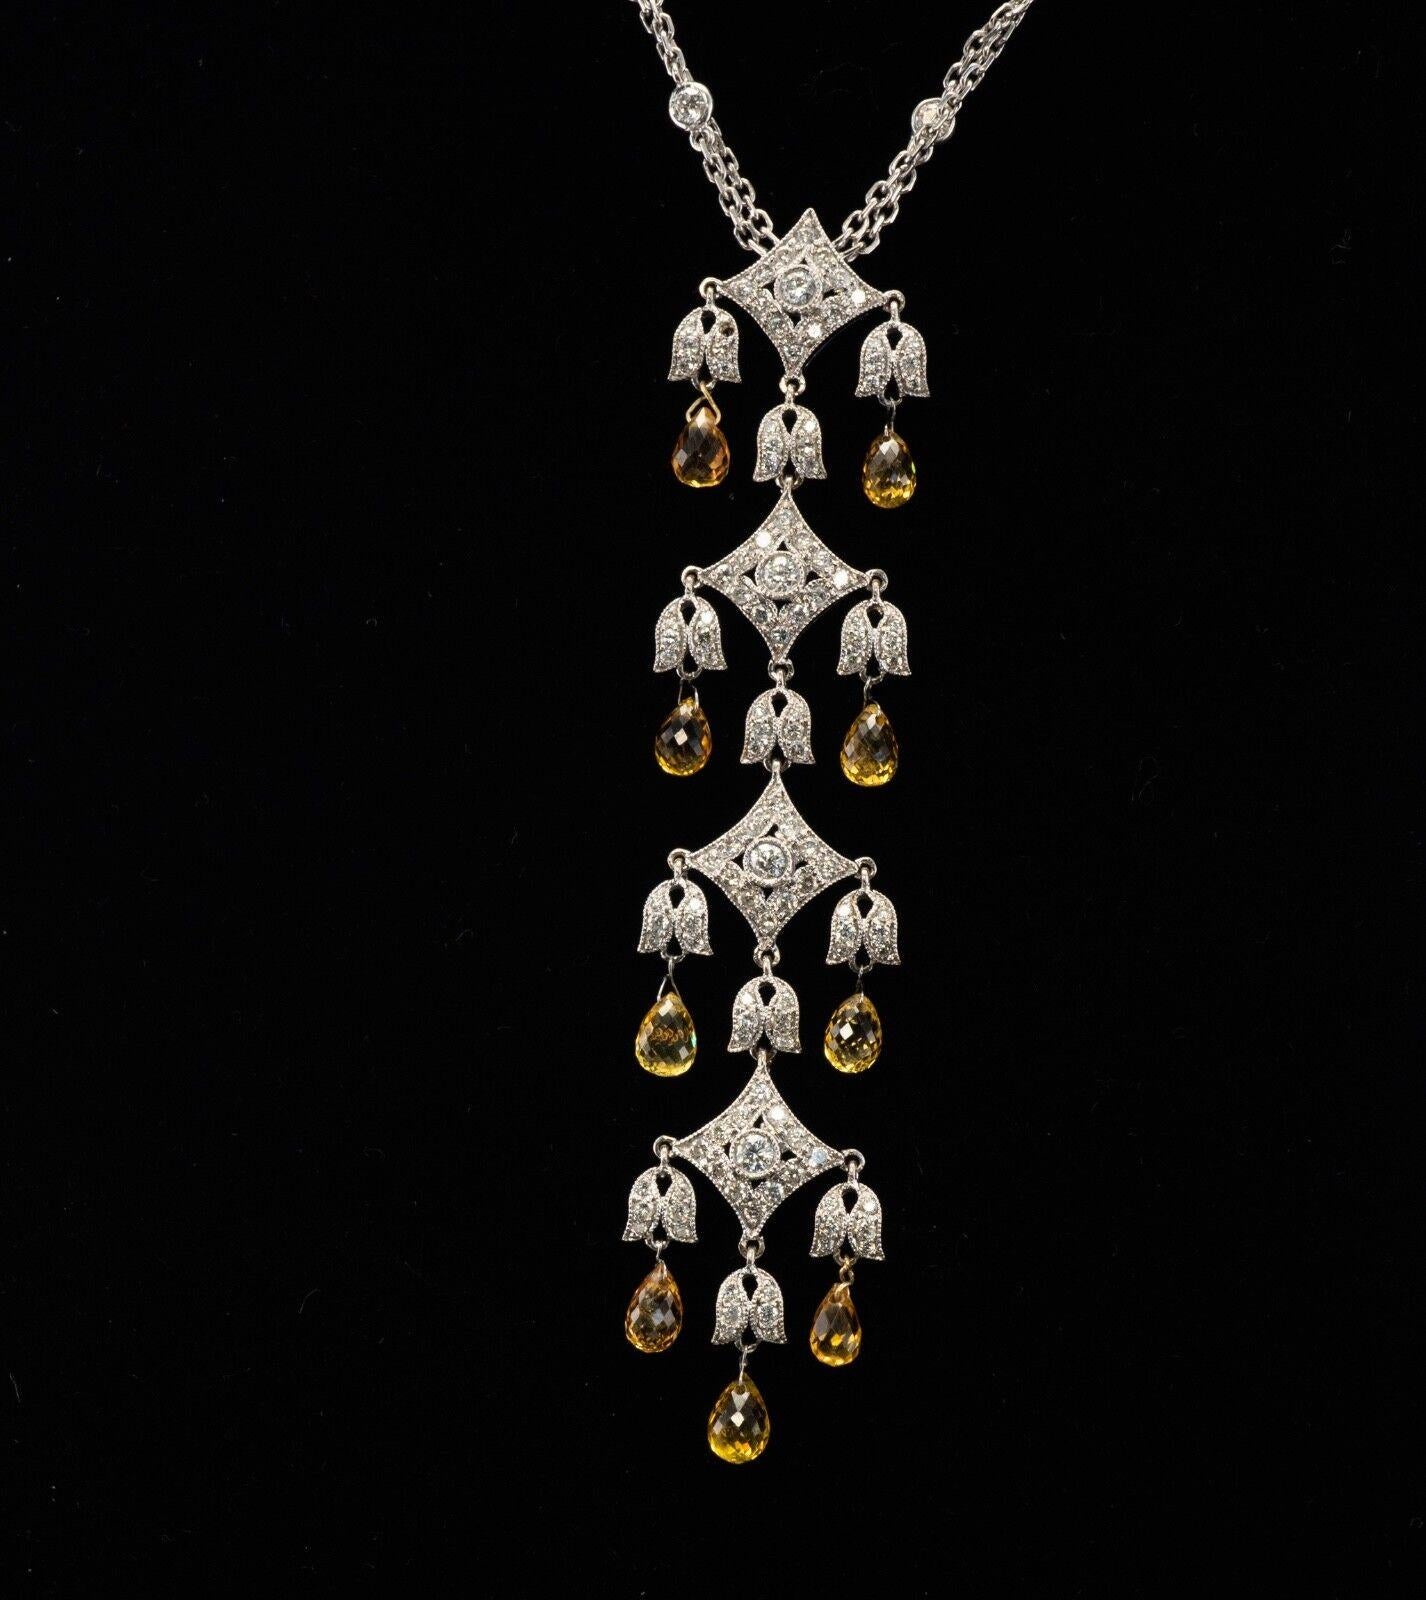 Yellow Sapphire Diamond Necklace Pendant 18K White Gold 1.85 TDW In Good Condition For Sale In East Brunswick, NJ